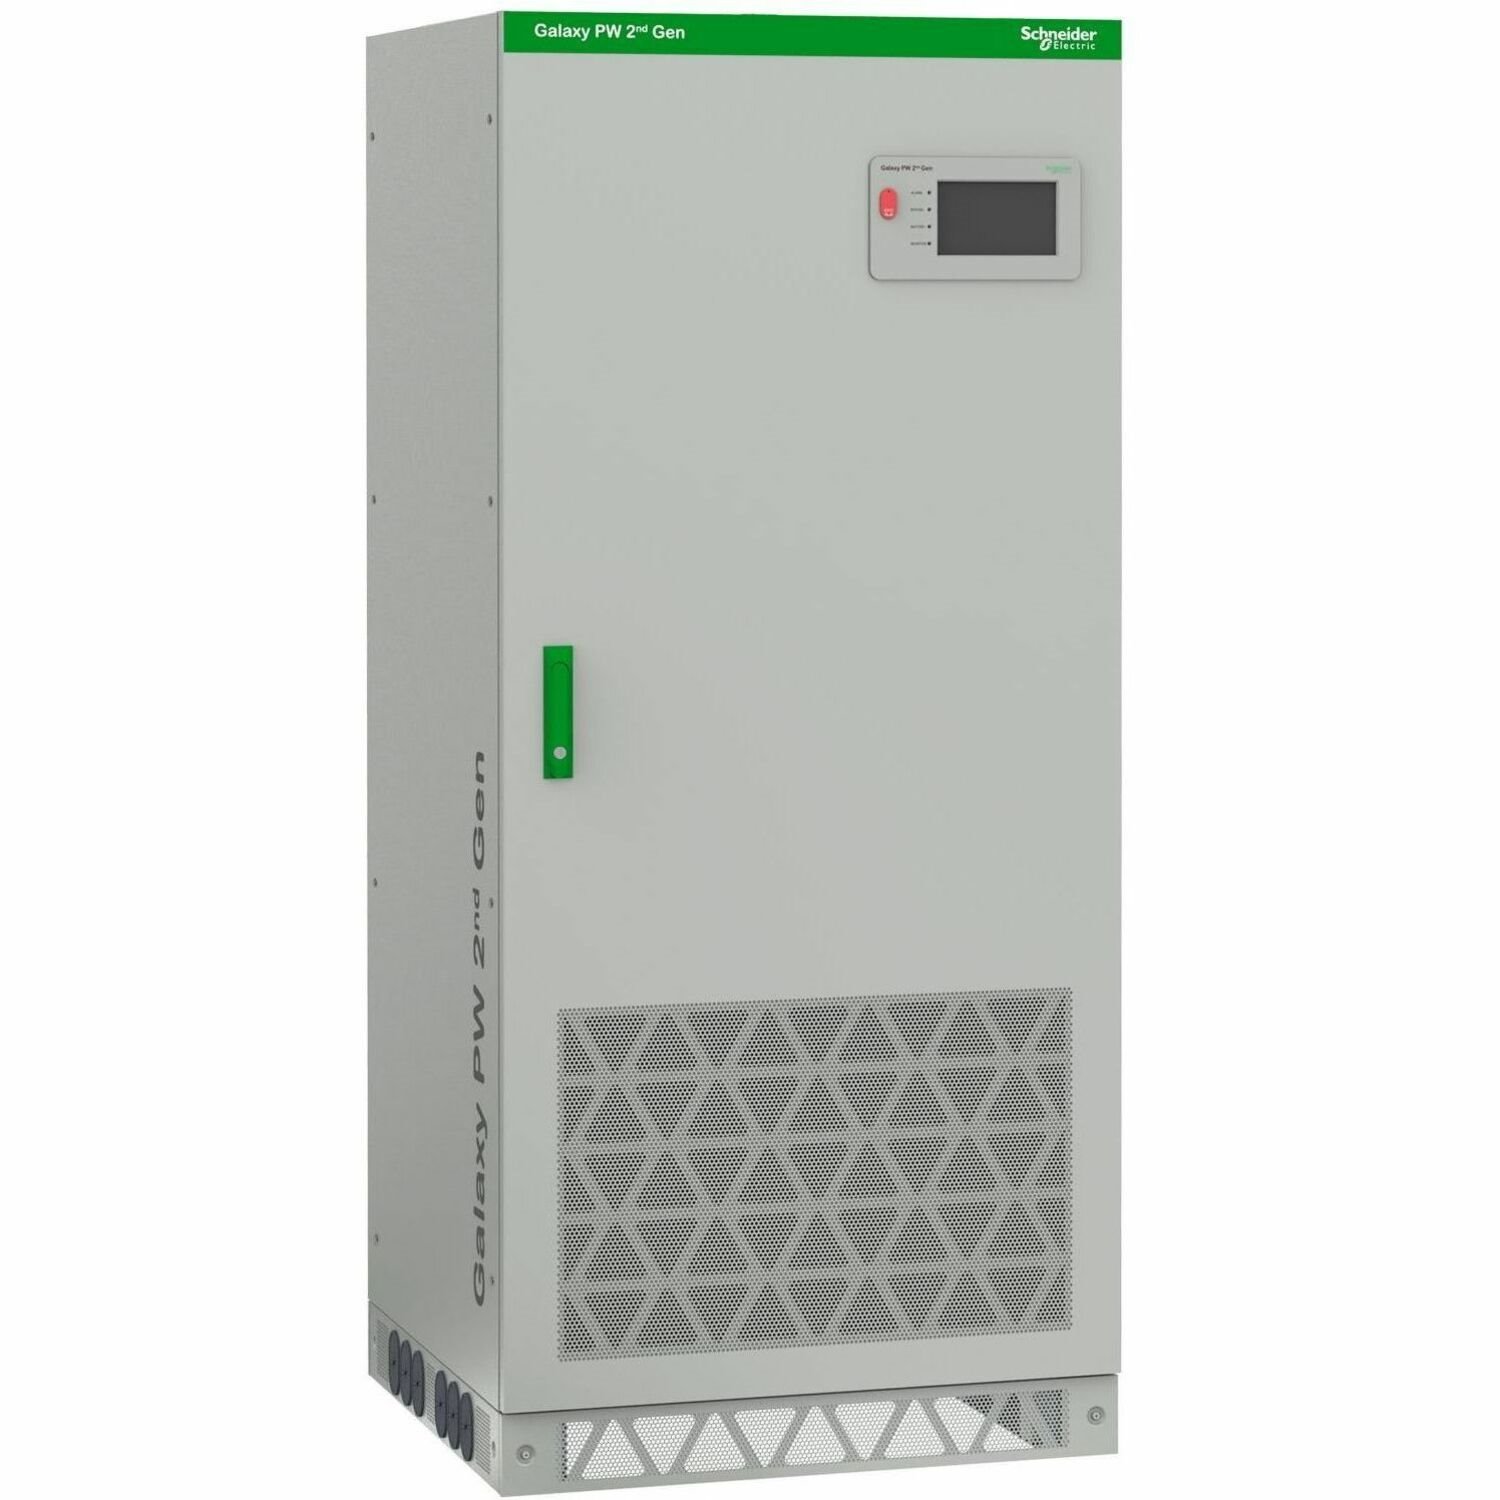 APC by Schneider Electric Galaxy PW 2nd Gen Double Conversion Online UPS - 10 kVA/8 kW - Three Phase